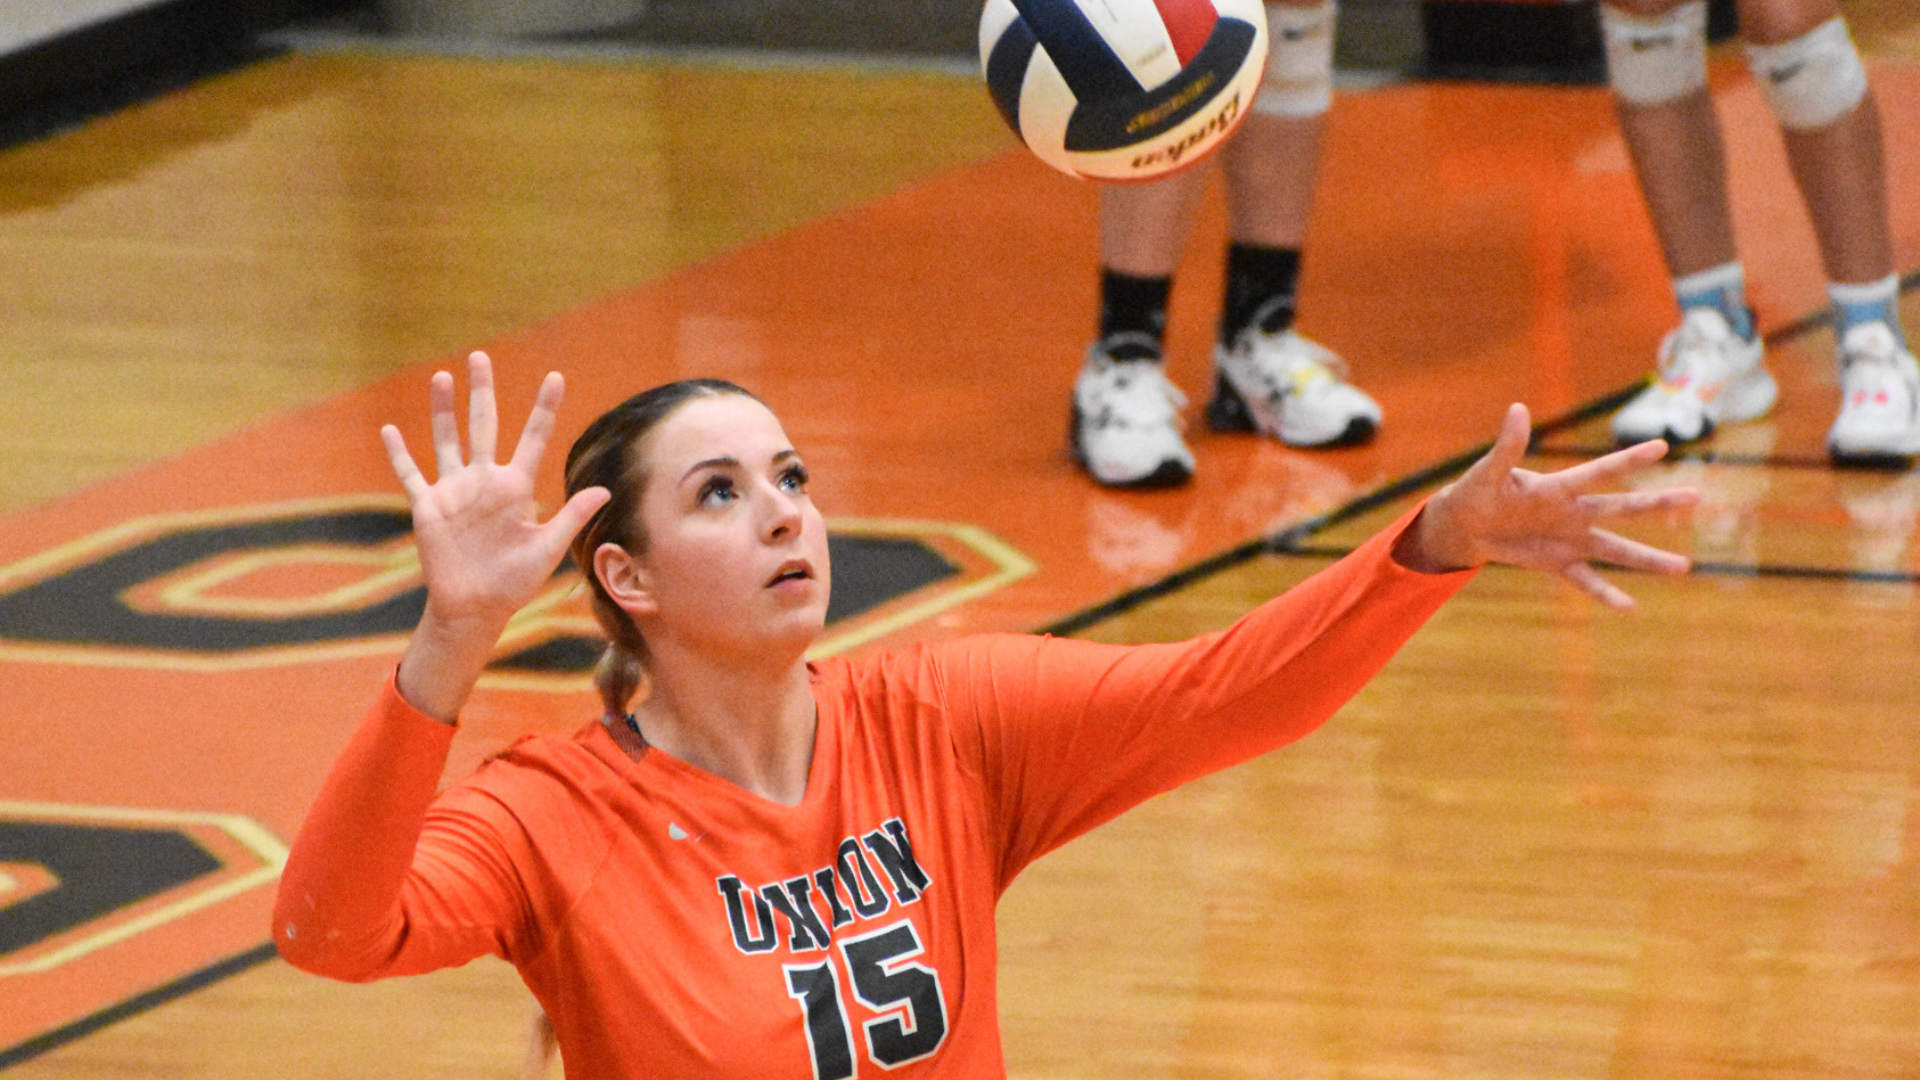 Union’s Raquel Kessler named First-Team All-Conference